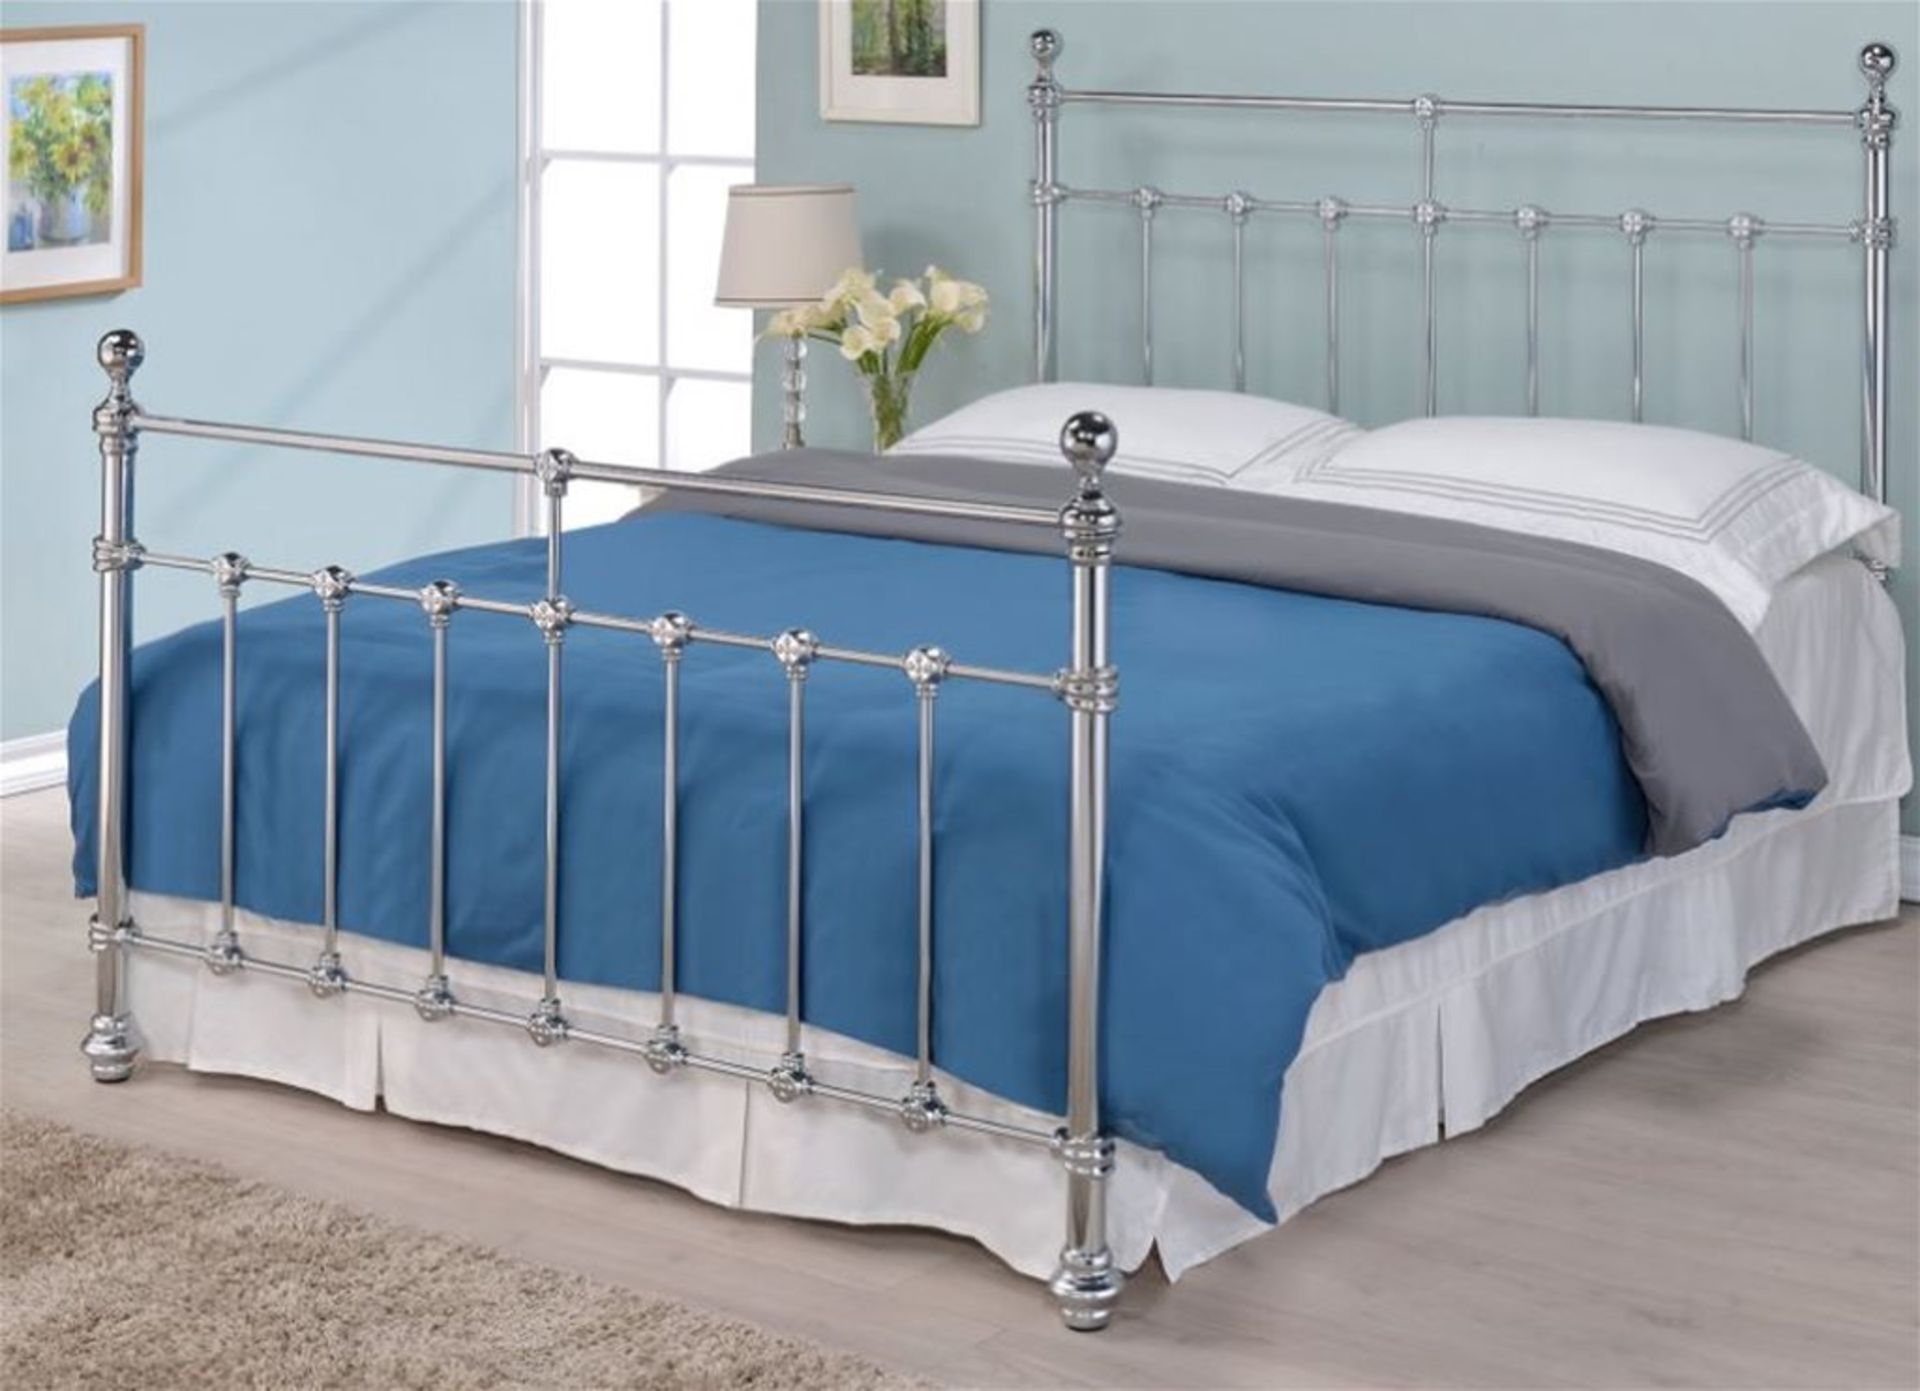 Kingsize metal bed frame from The Artisan Bed Company